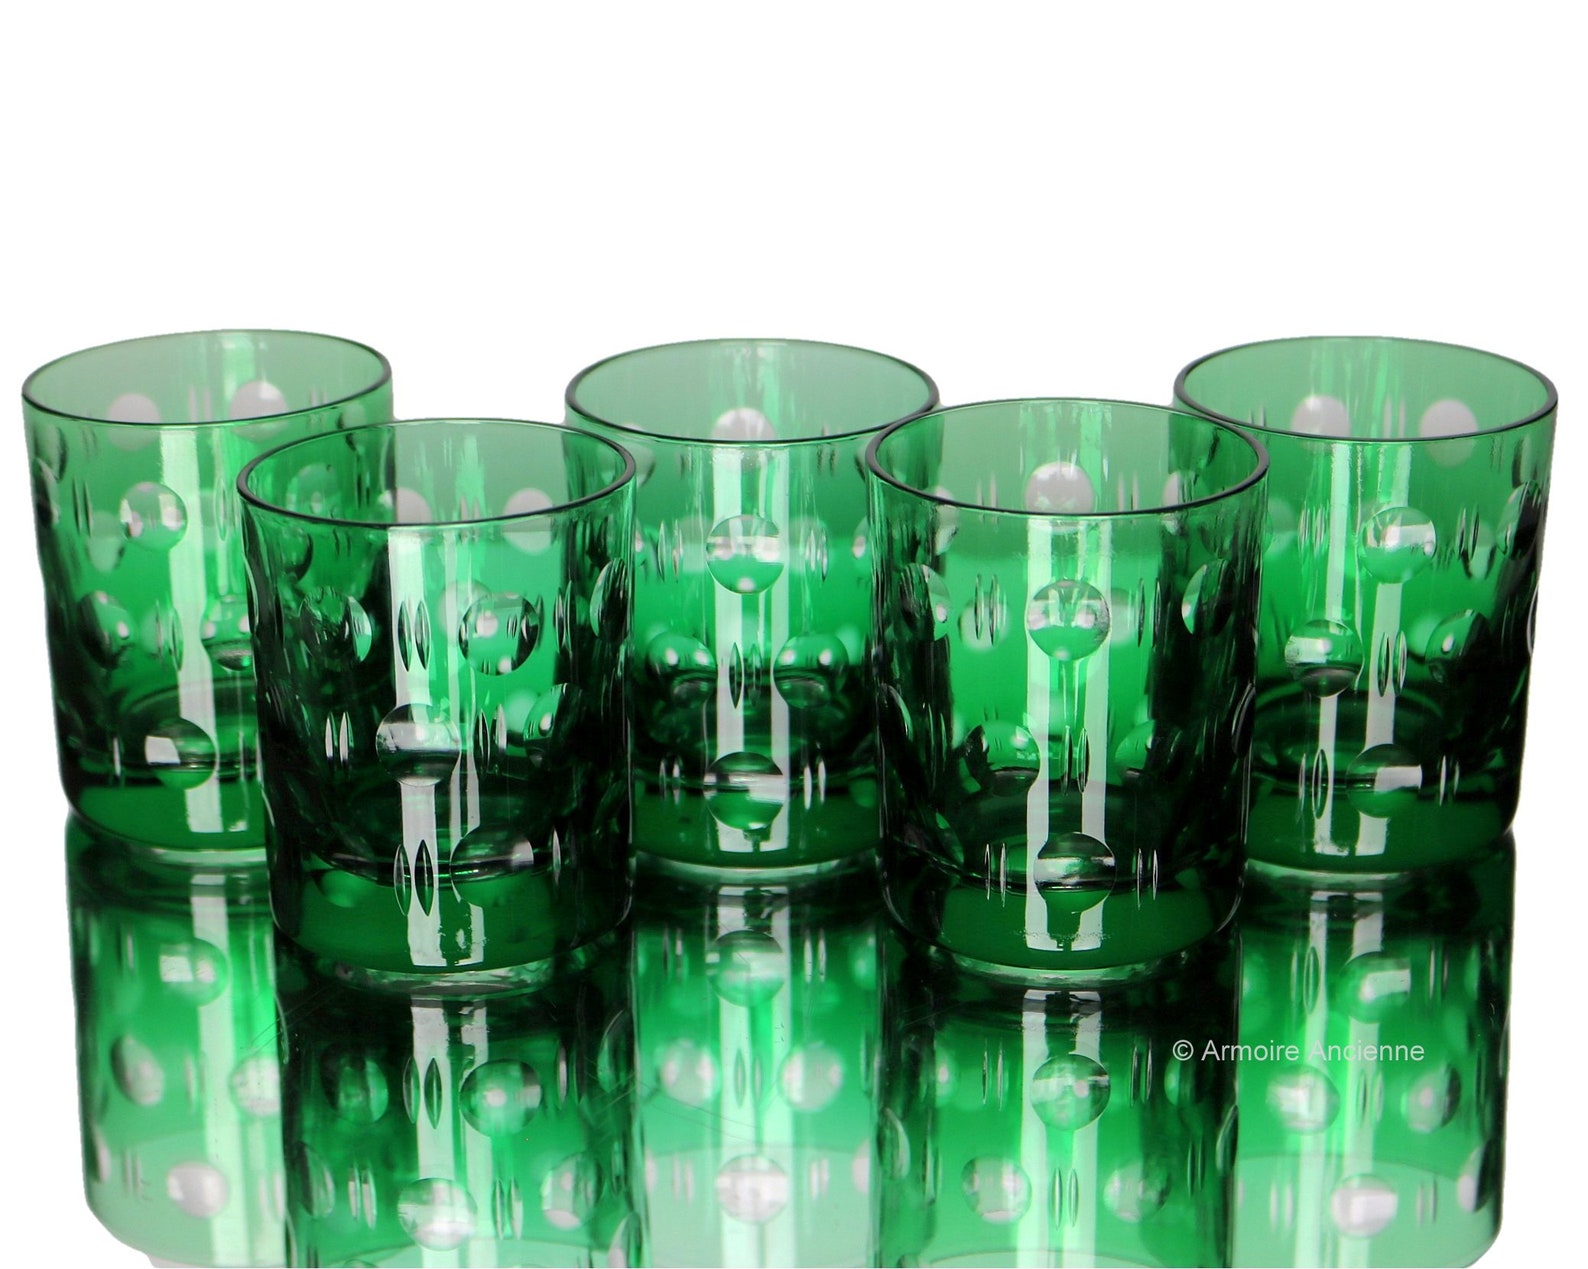 5x Crystal SHOT Glasses with Emerald Green Overlay and Cut | Etsy